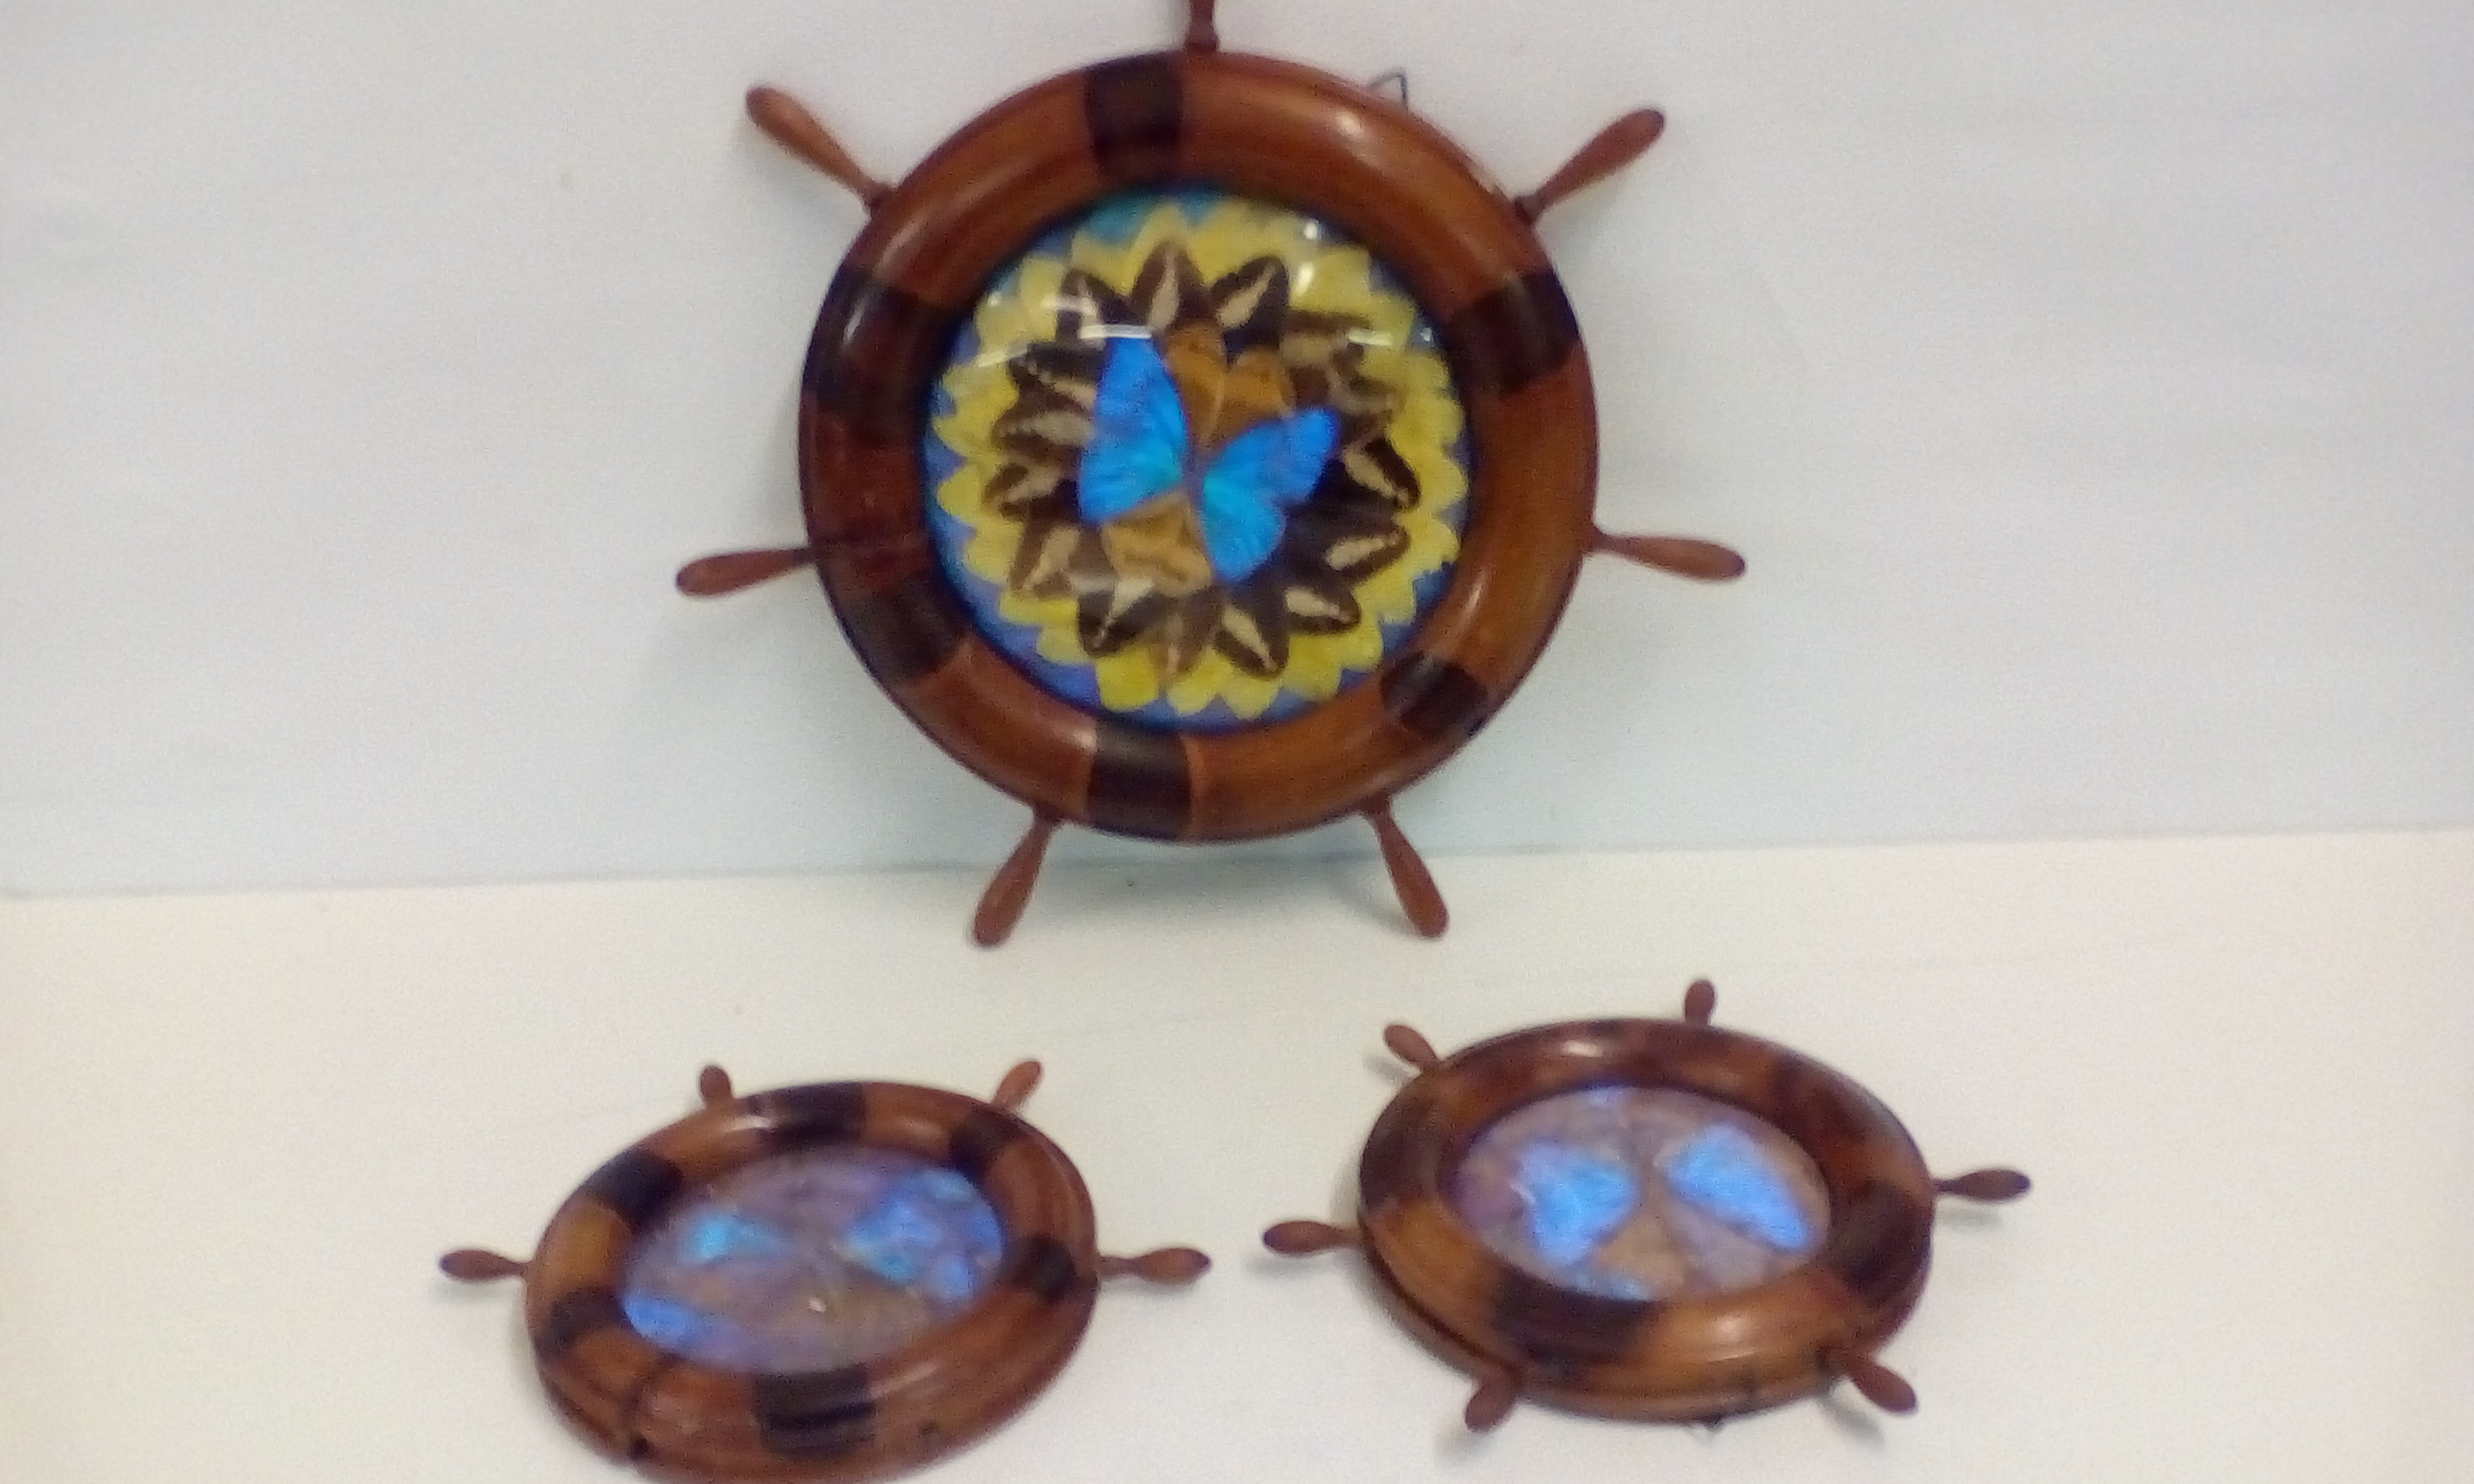 Three ships wheels inset with iridescent butterfly